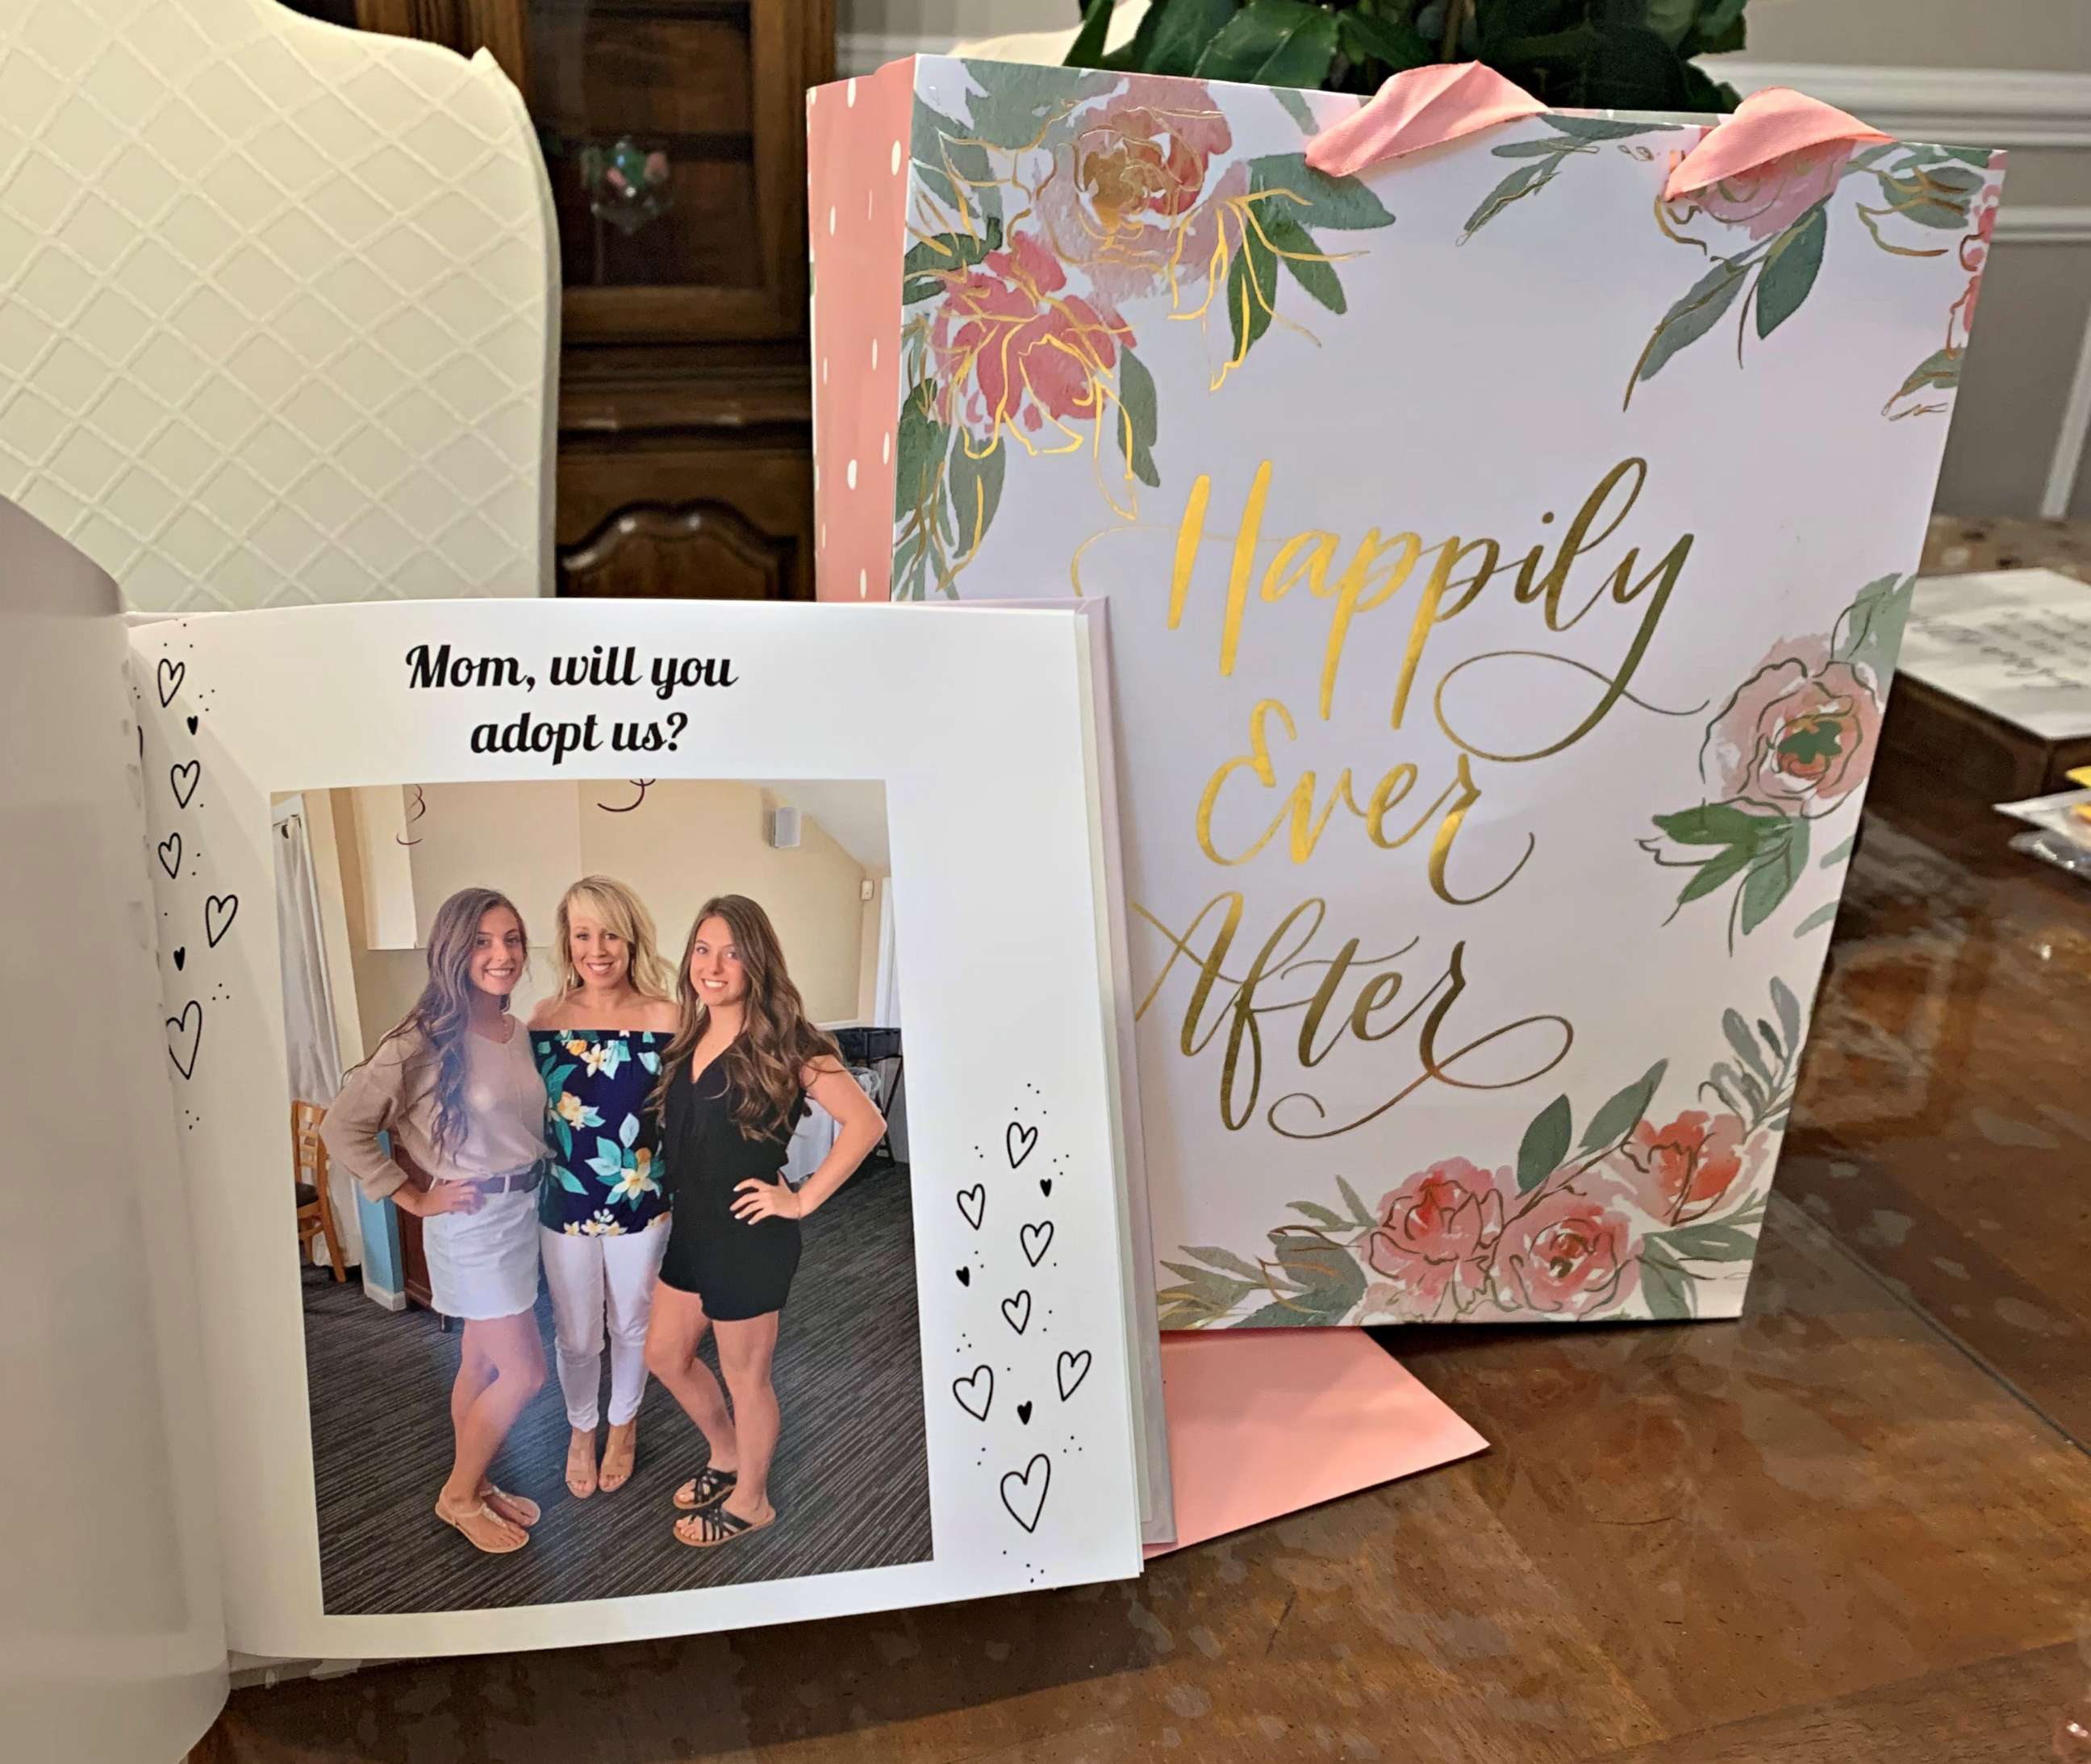 PHOTO: On Mother's Day, Gabriella and Julianna Ruvolo gifted Becky Ruvolo a photo book, which included a message asking Becky Ruvolo to adopt them.